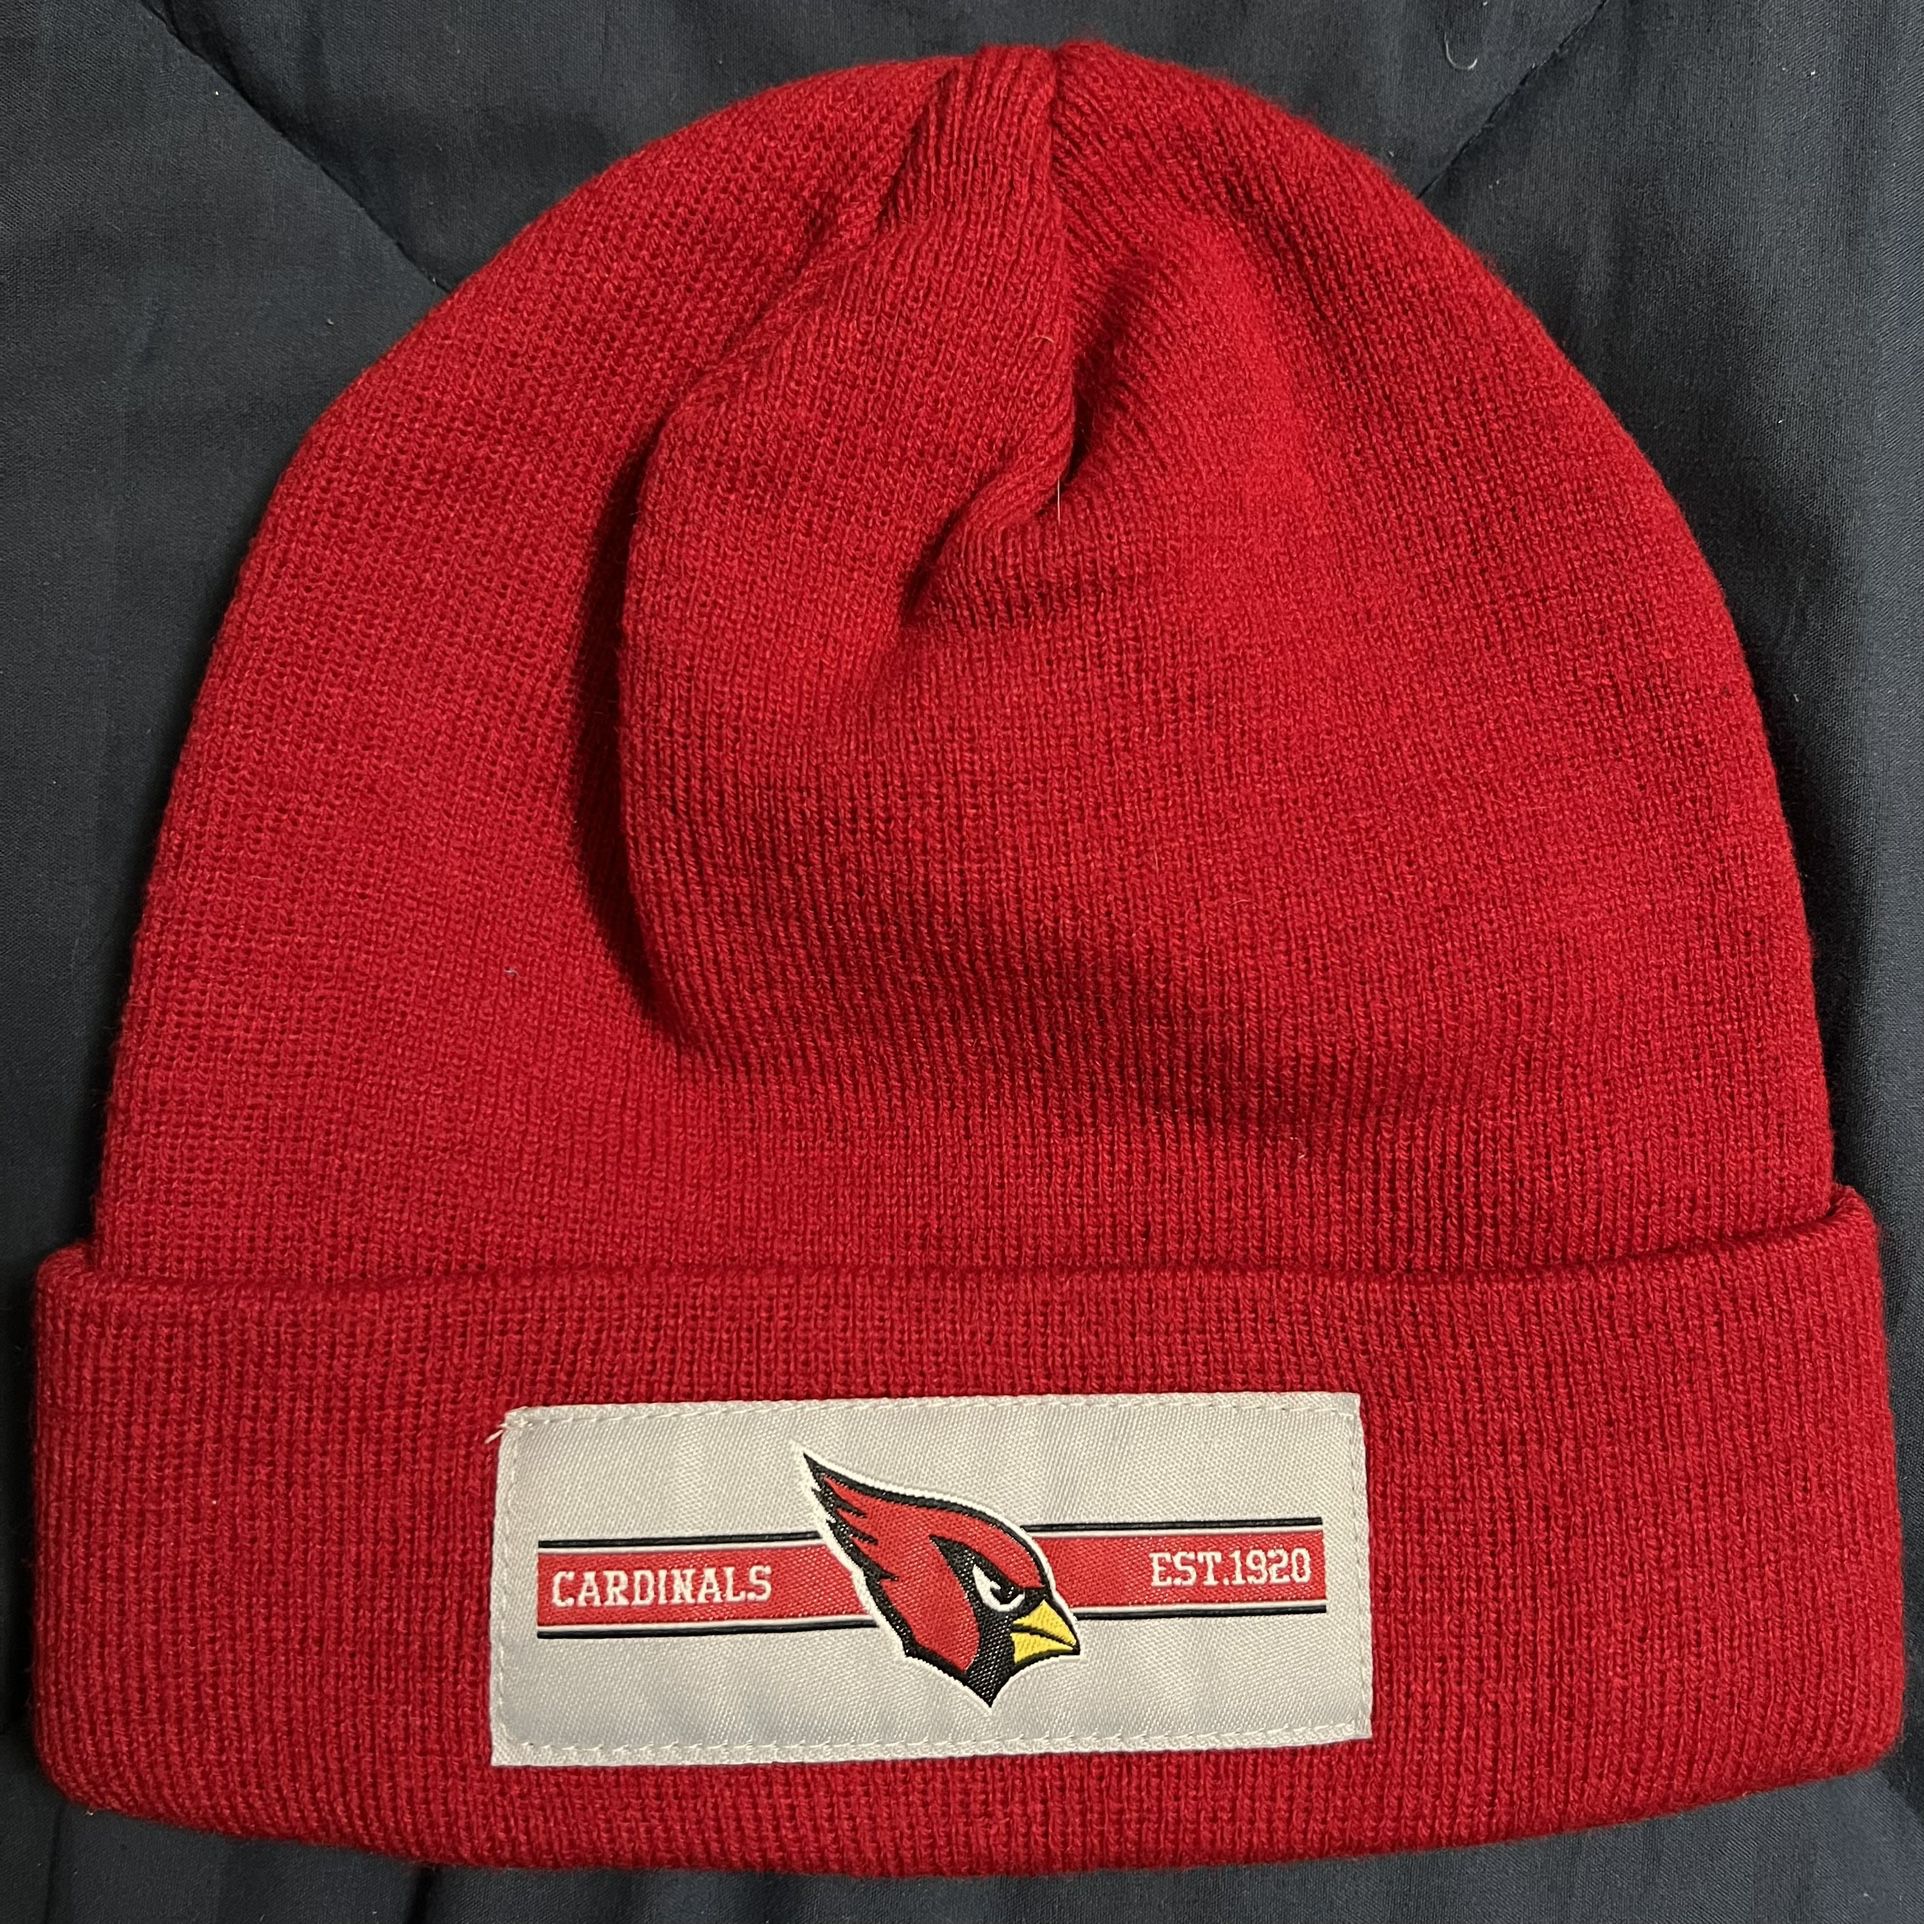 Black Lv Beanie for Sale in St. Louis, MO - OfferUp